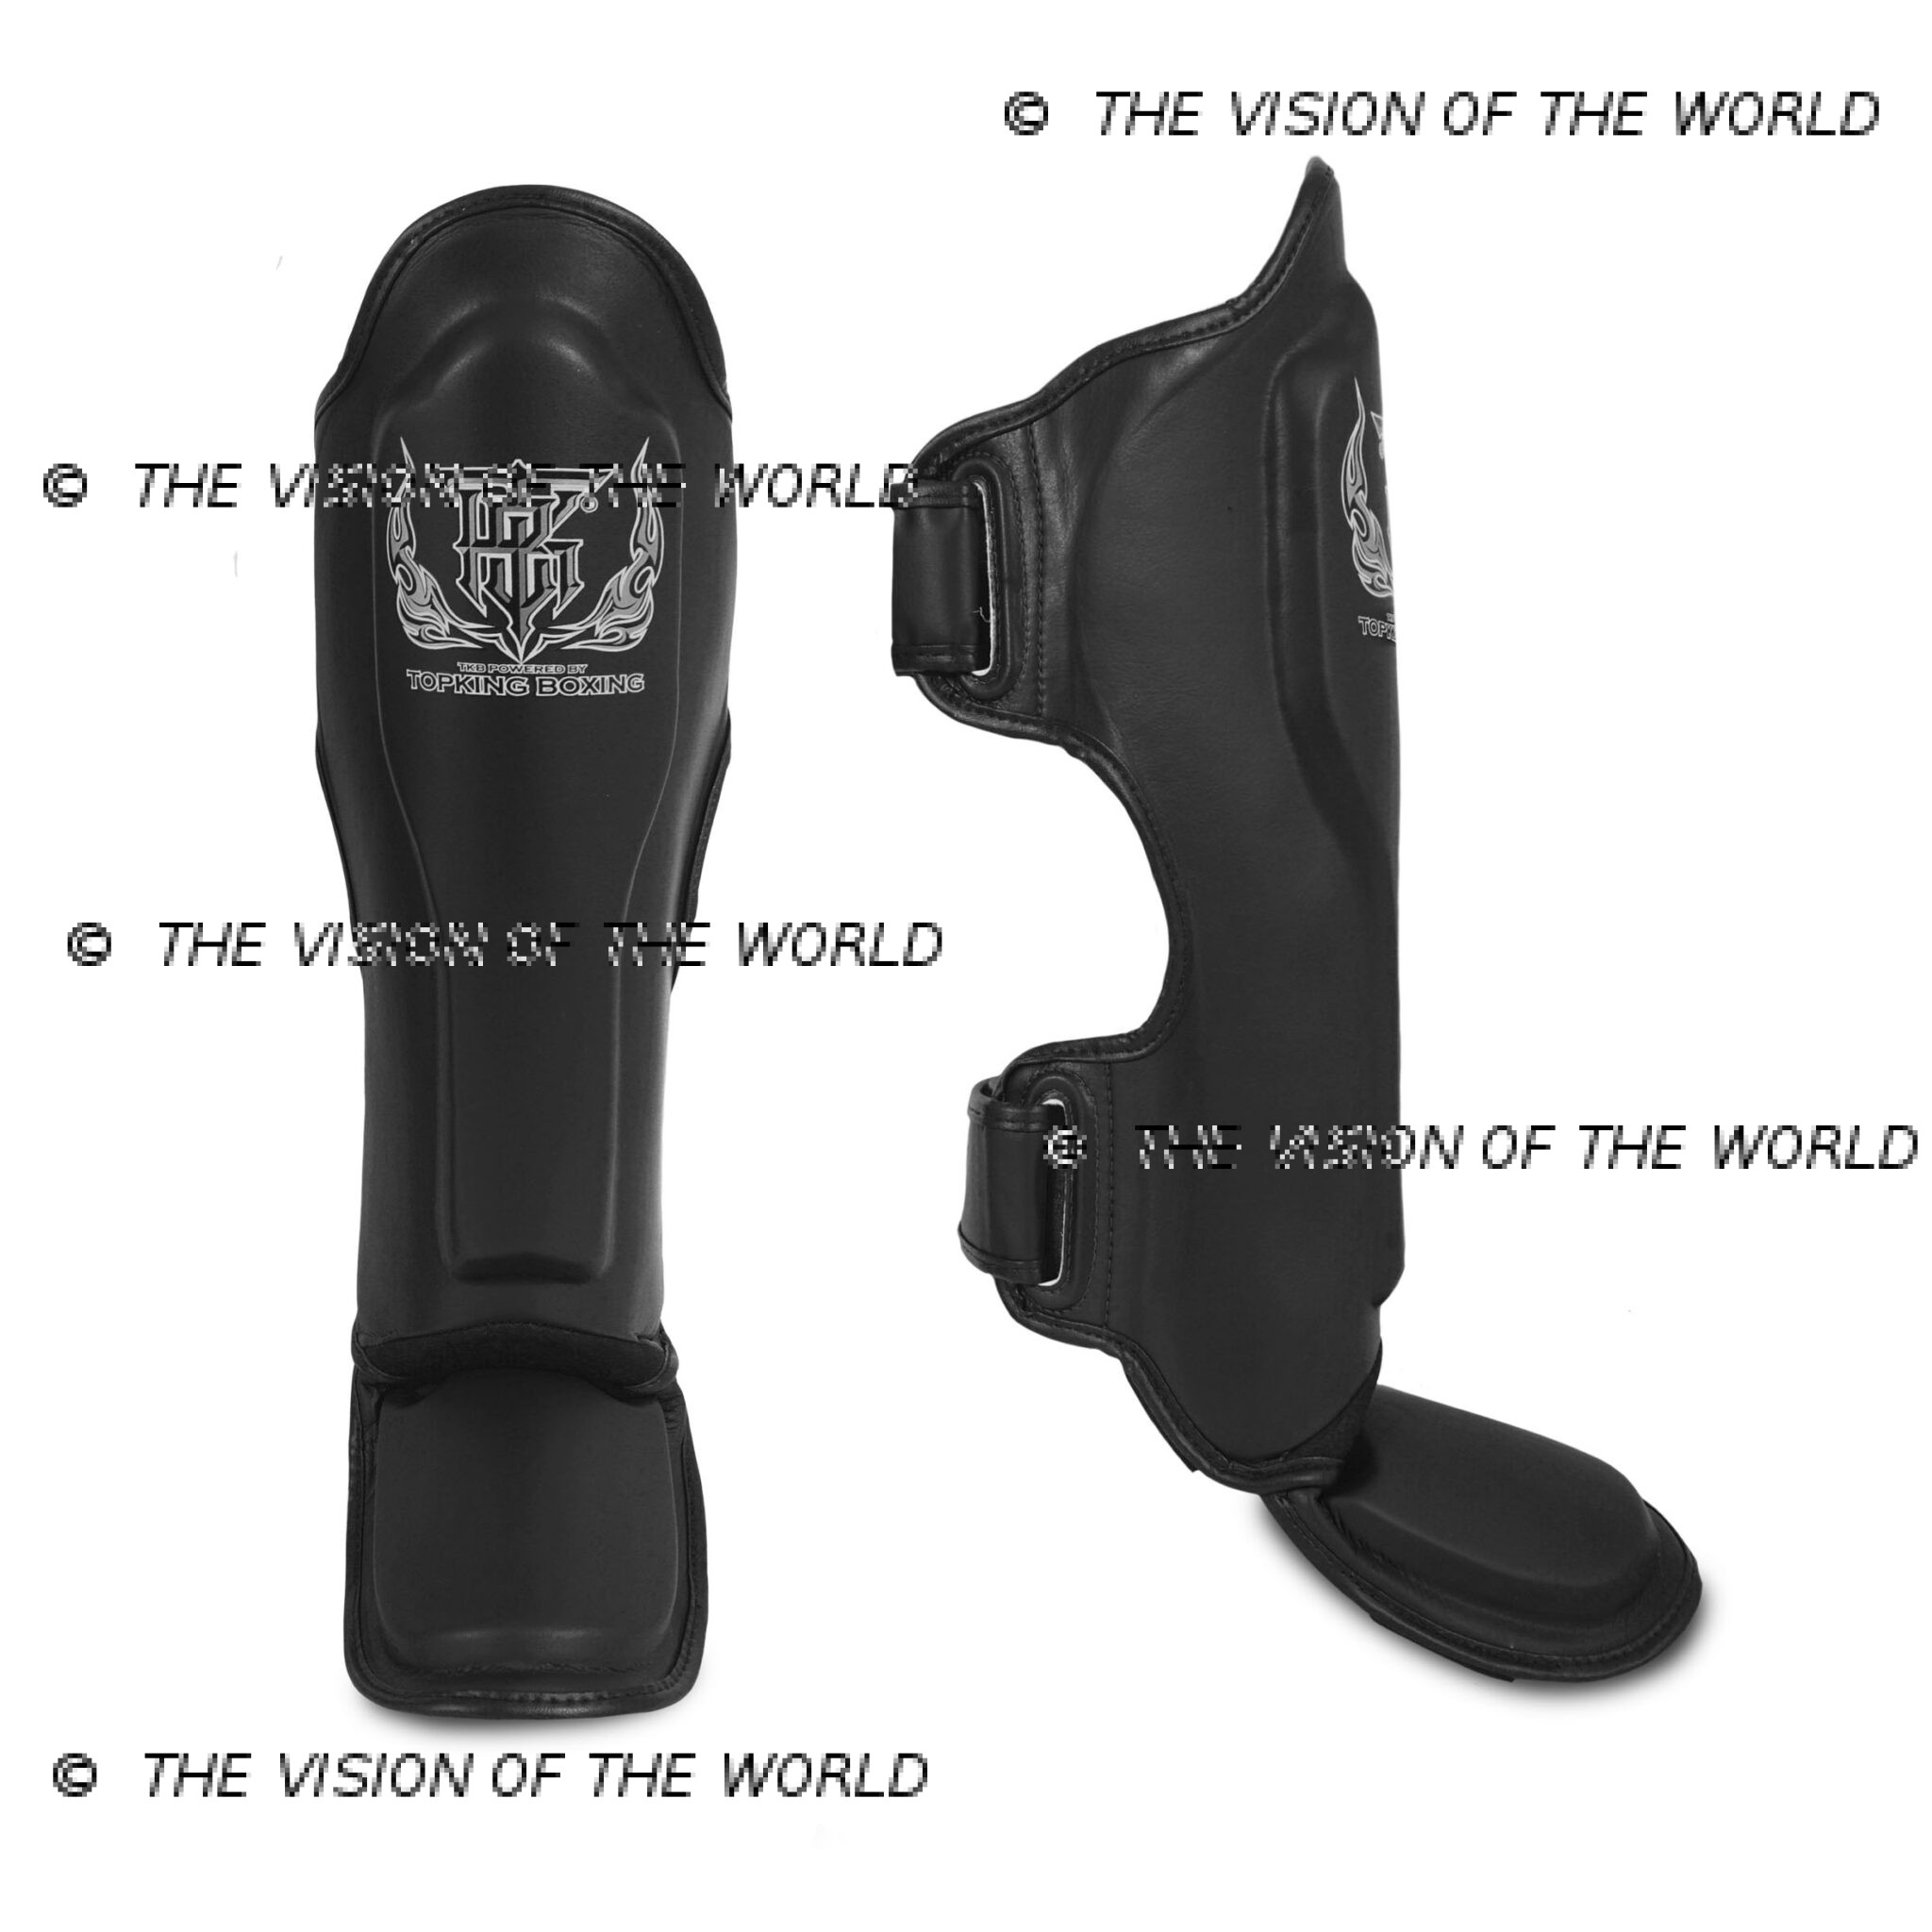 https://www.thevisionoftheworld.com/wp-content/uploads/2020/01/Prote%CC%80ge-tibia-top-king-noir-muay-thai-mma-kickboxing--scaled.jpg